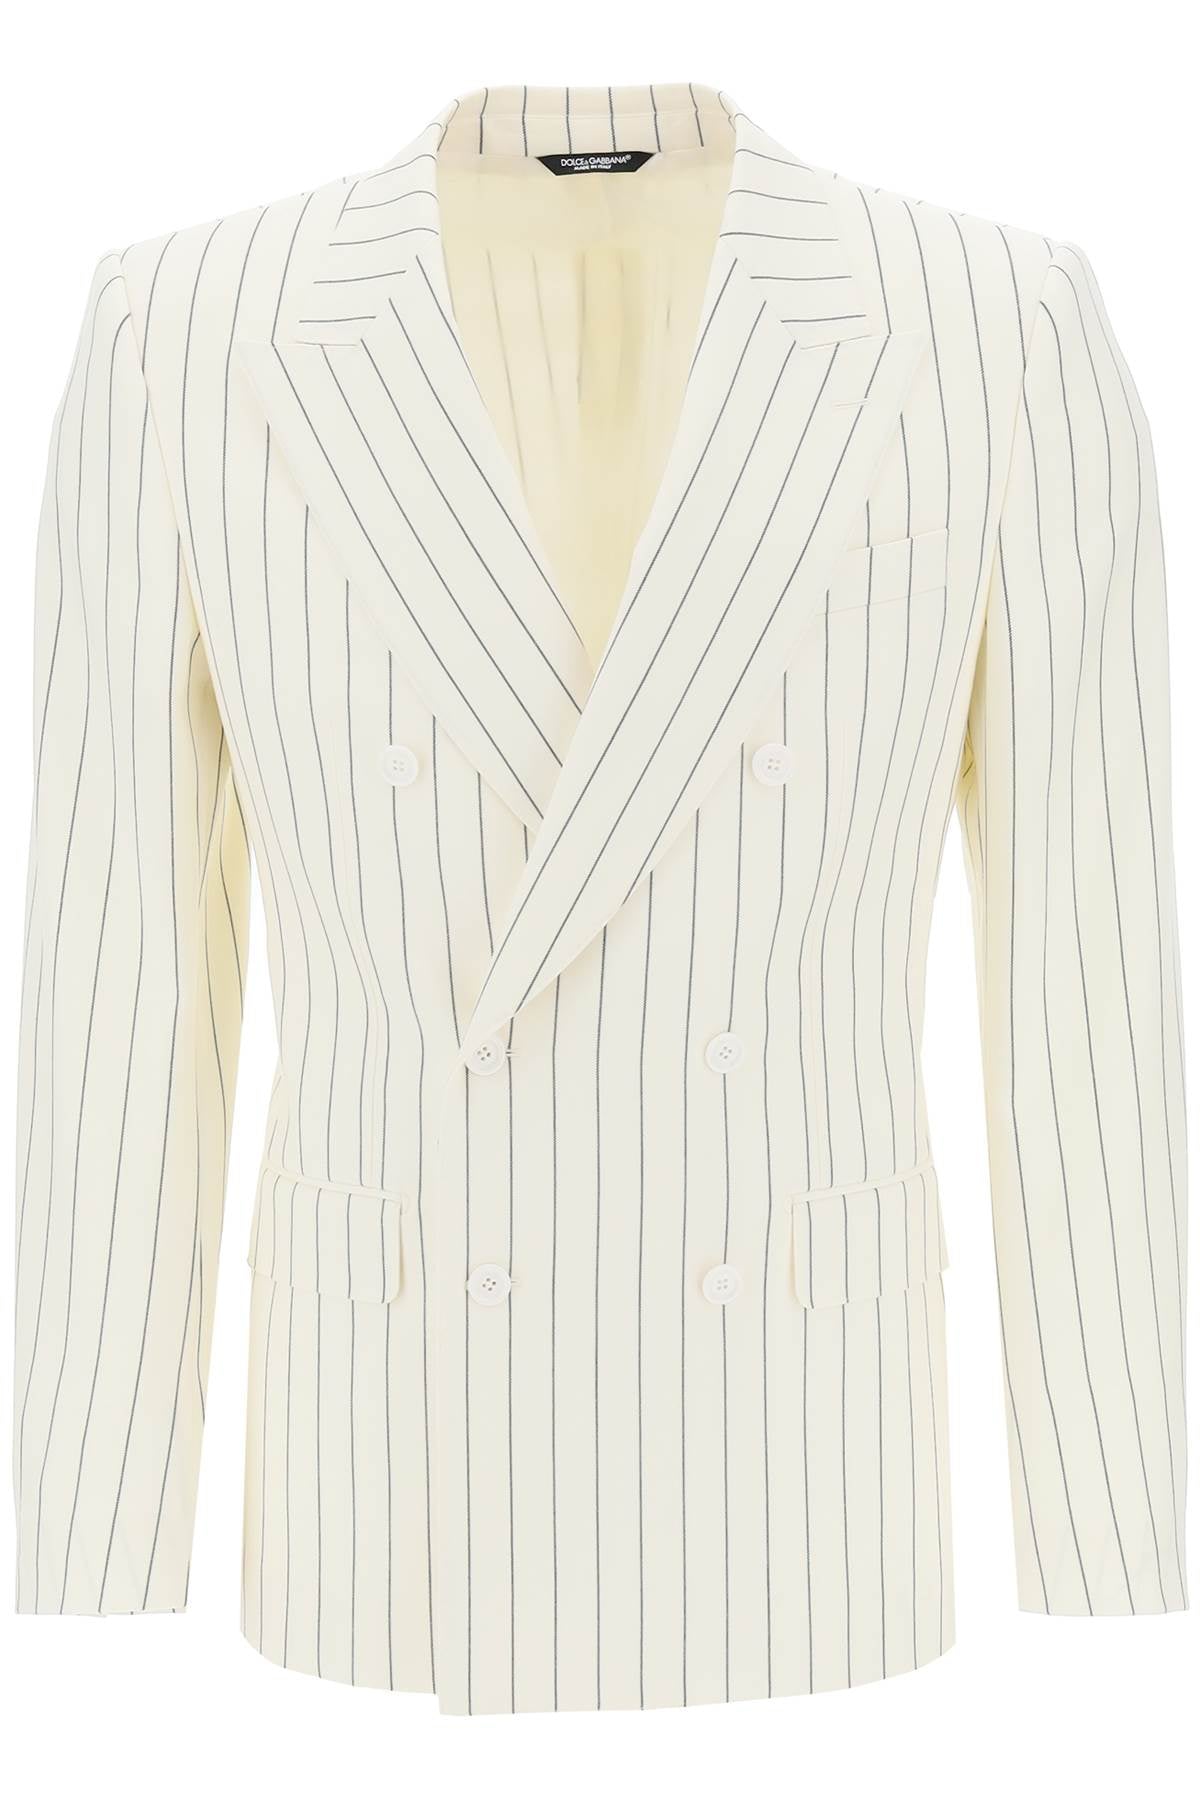 Dolce & gabbana double-breasted pinstripe-0